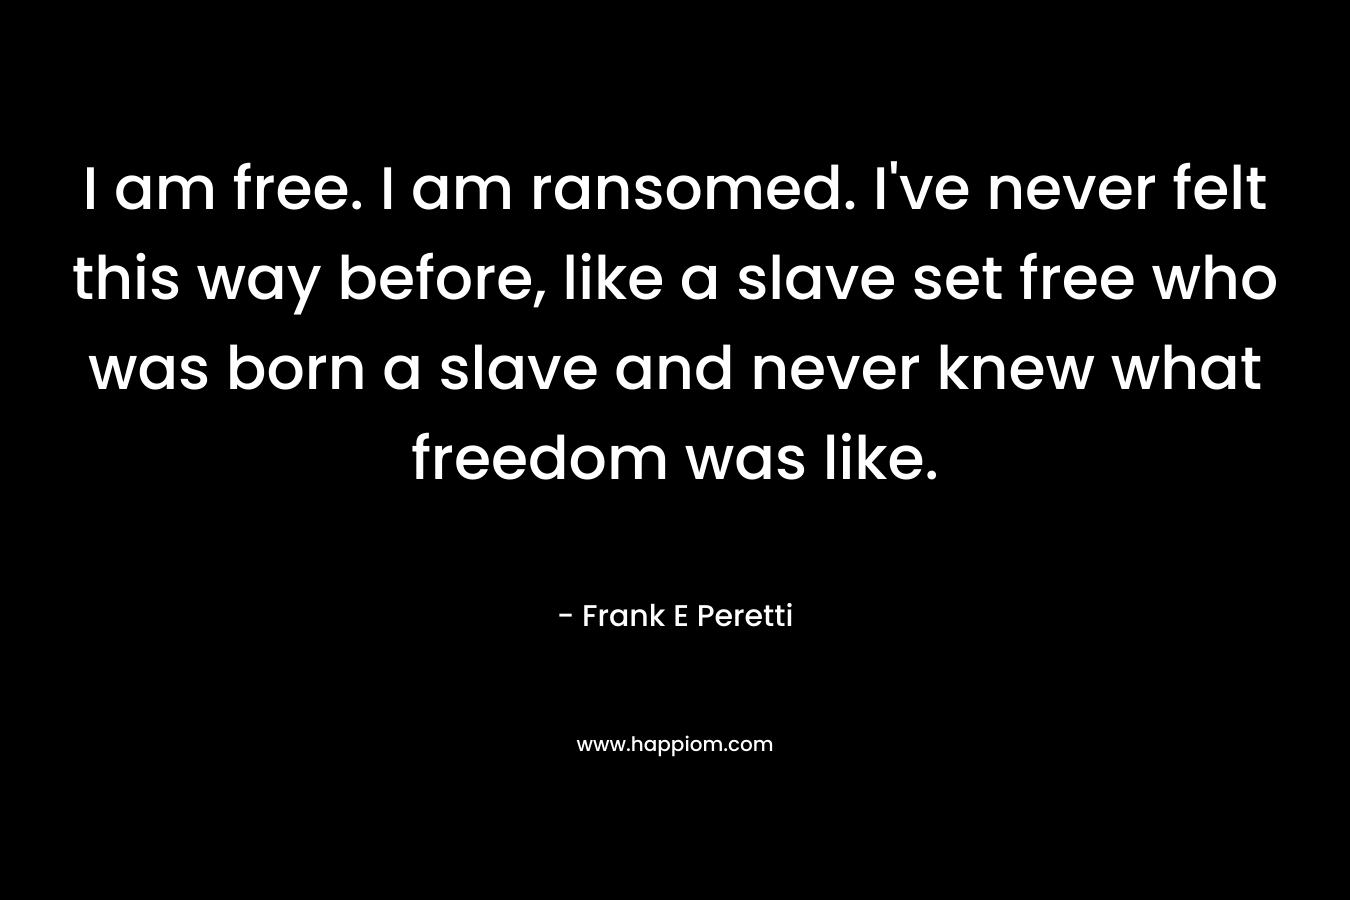 I am free. I am ransomed. I've never felt this way before, like a slave set free who was born a slave and never knew what freedom was like.